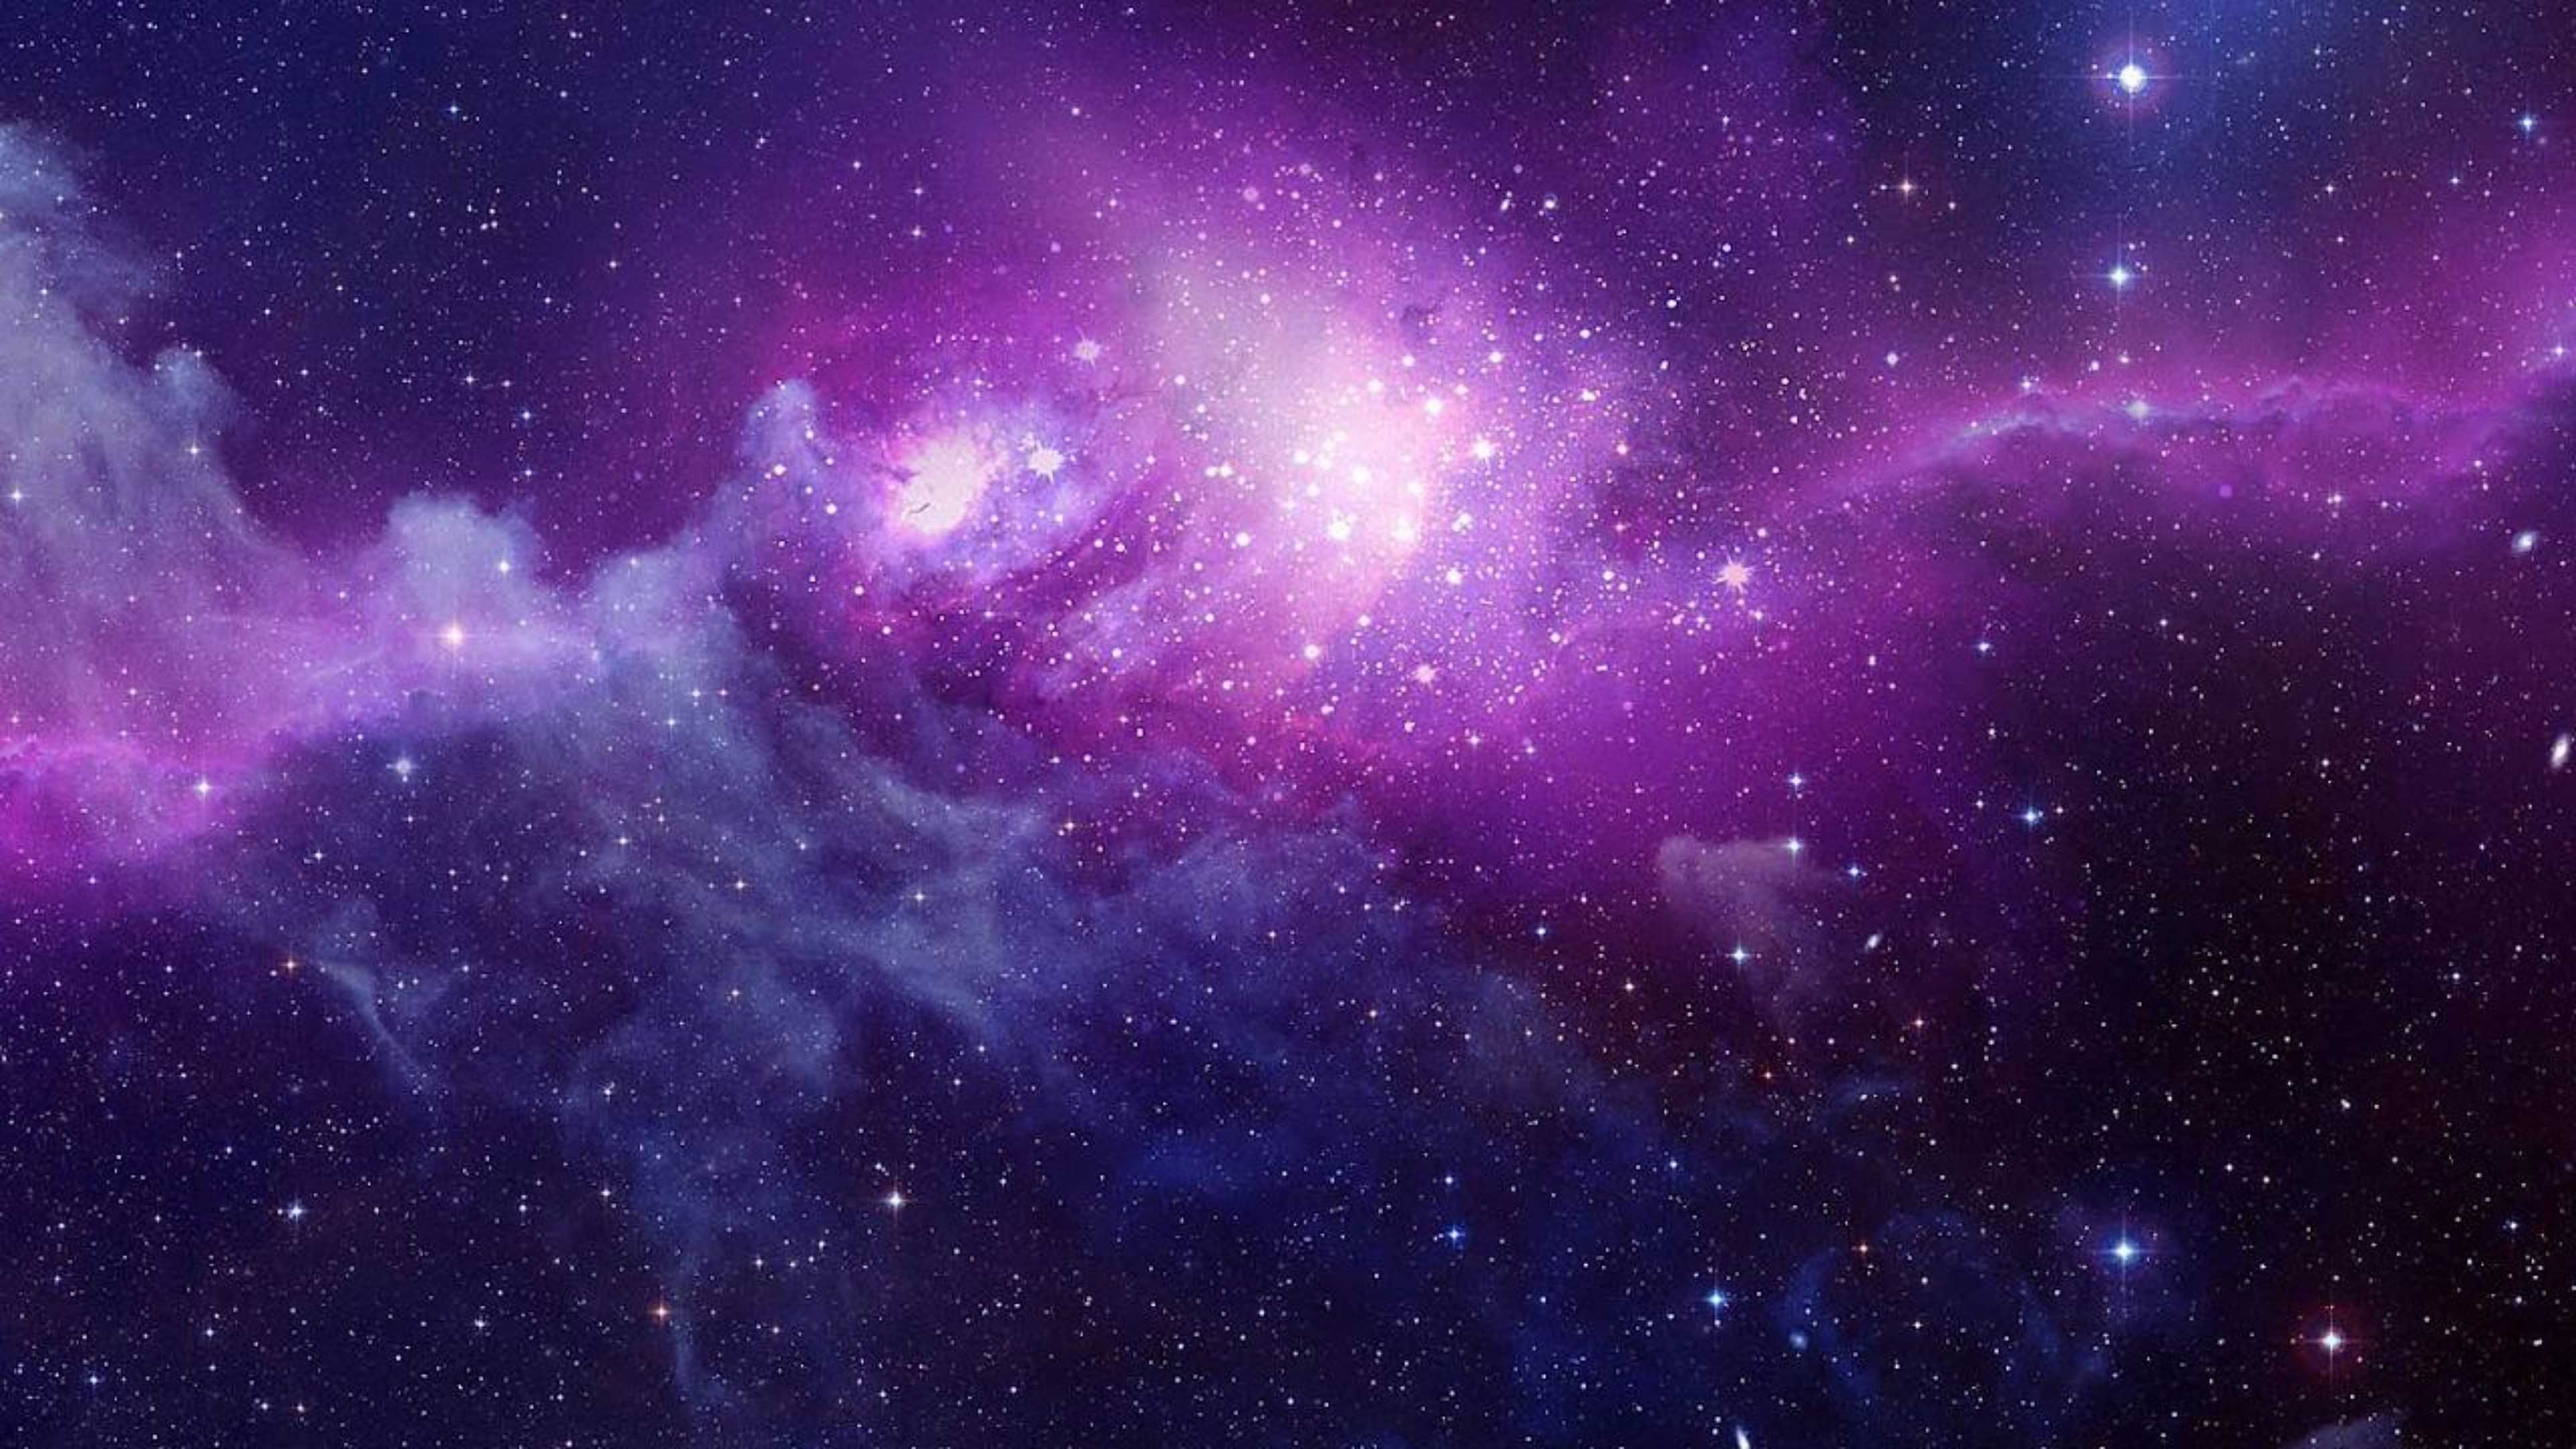 Space 4K Wallpaper (49+ images)